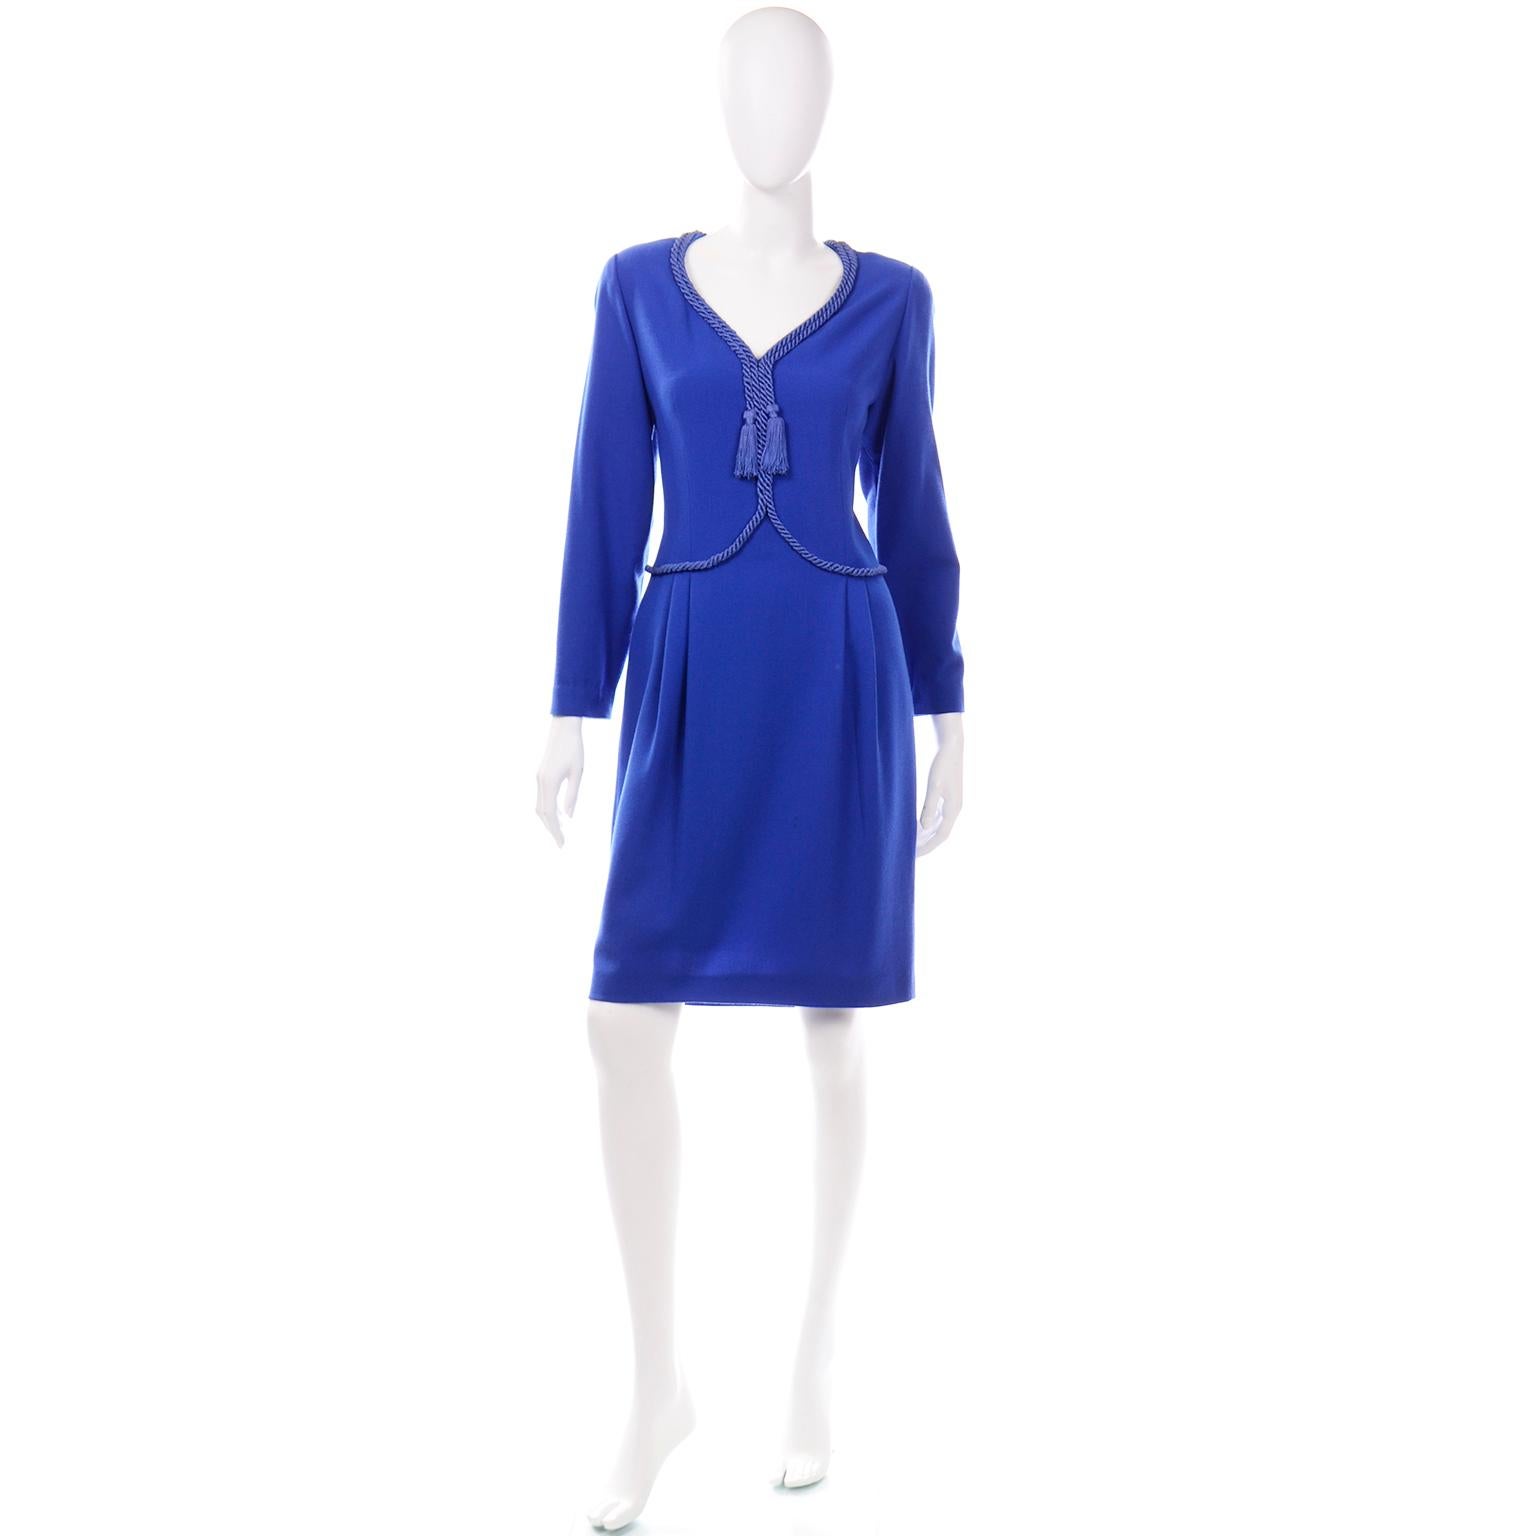 This is a beautifully made vintage Valentino Miss V Blue wool crepe dress with lovely rope trim and tassels.This timeless V neck dress is fully lined and has built in shoulder pads for structure. The dress closes with a back center zipper and was